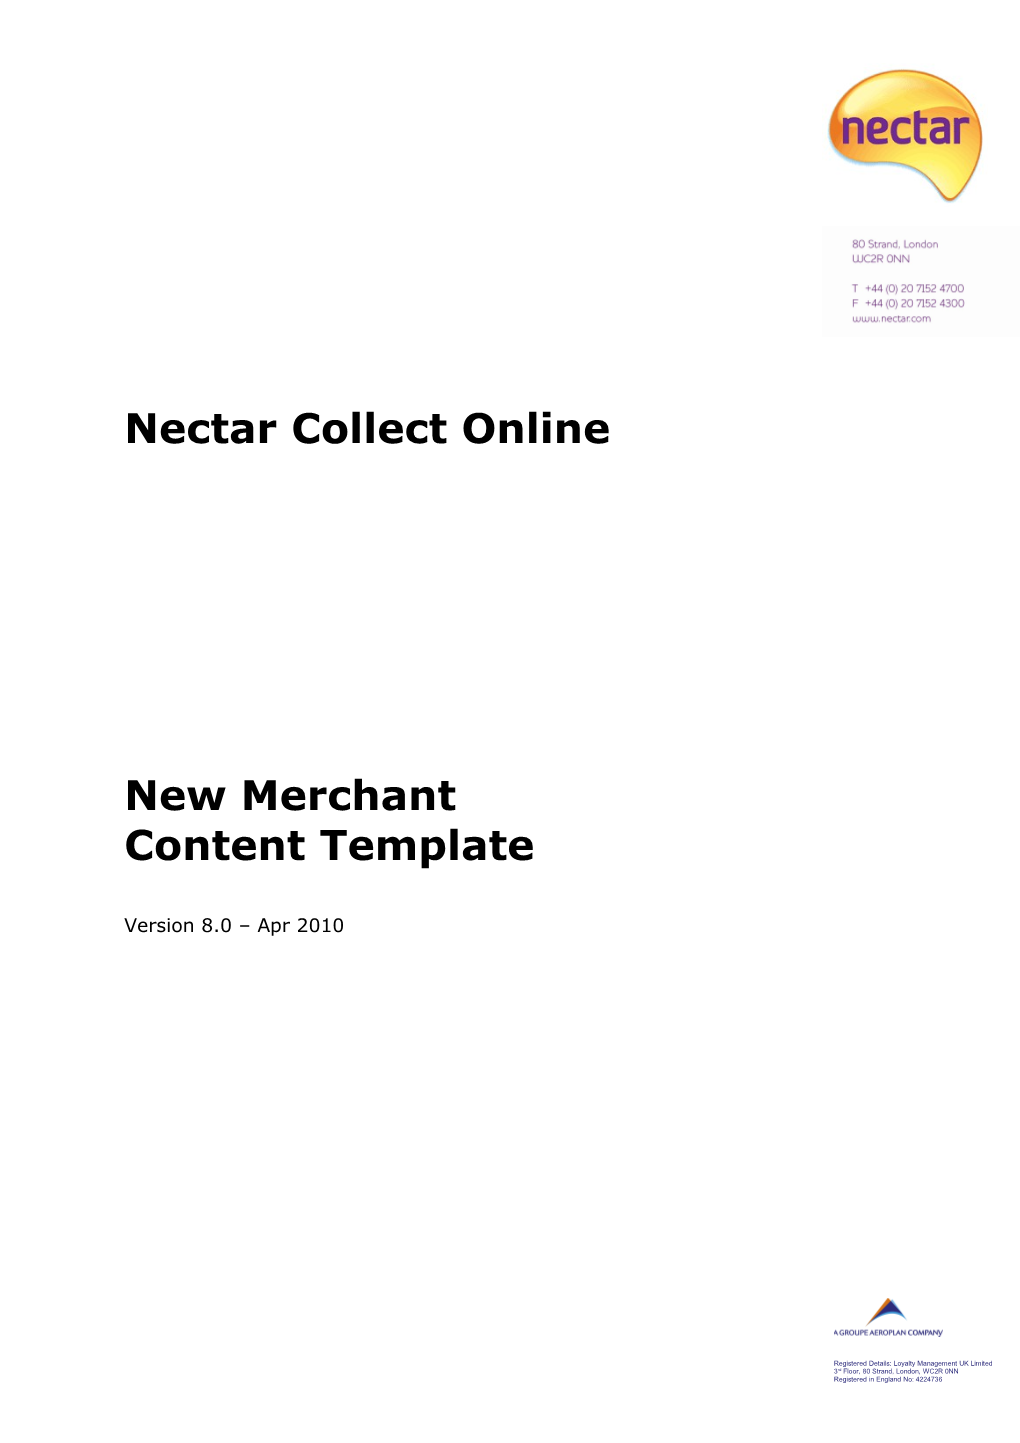 Background to Merchant Pages on Nectar